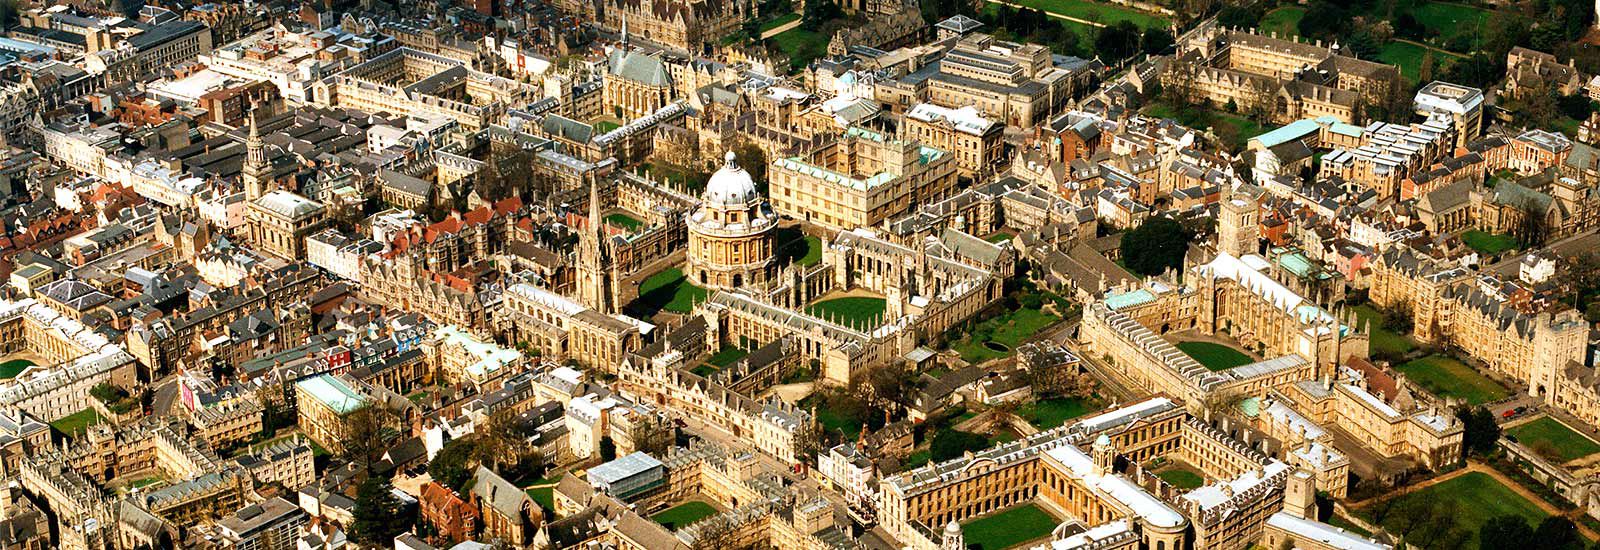 An aerial photograph of Oxford